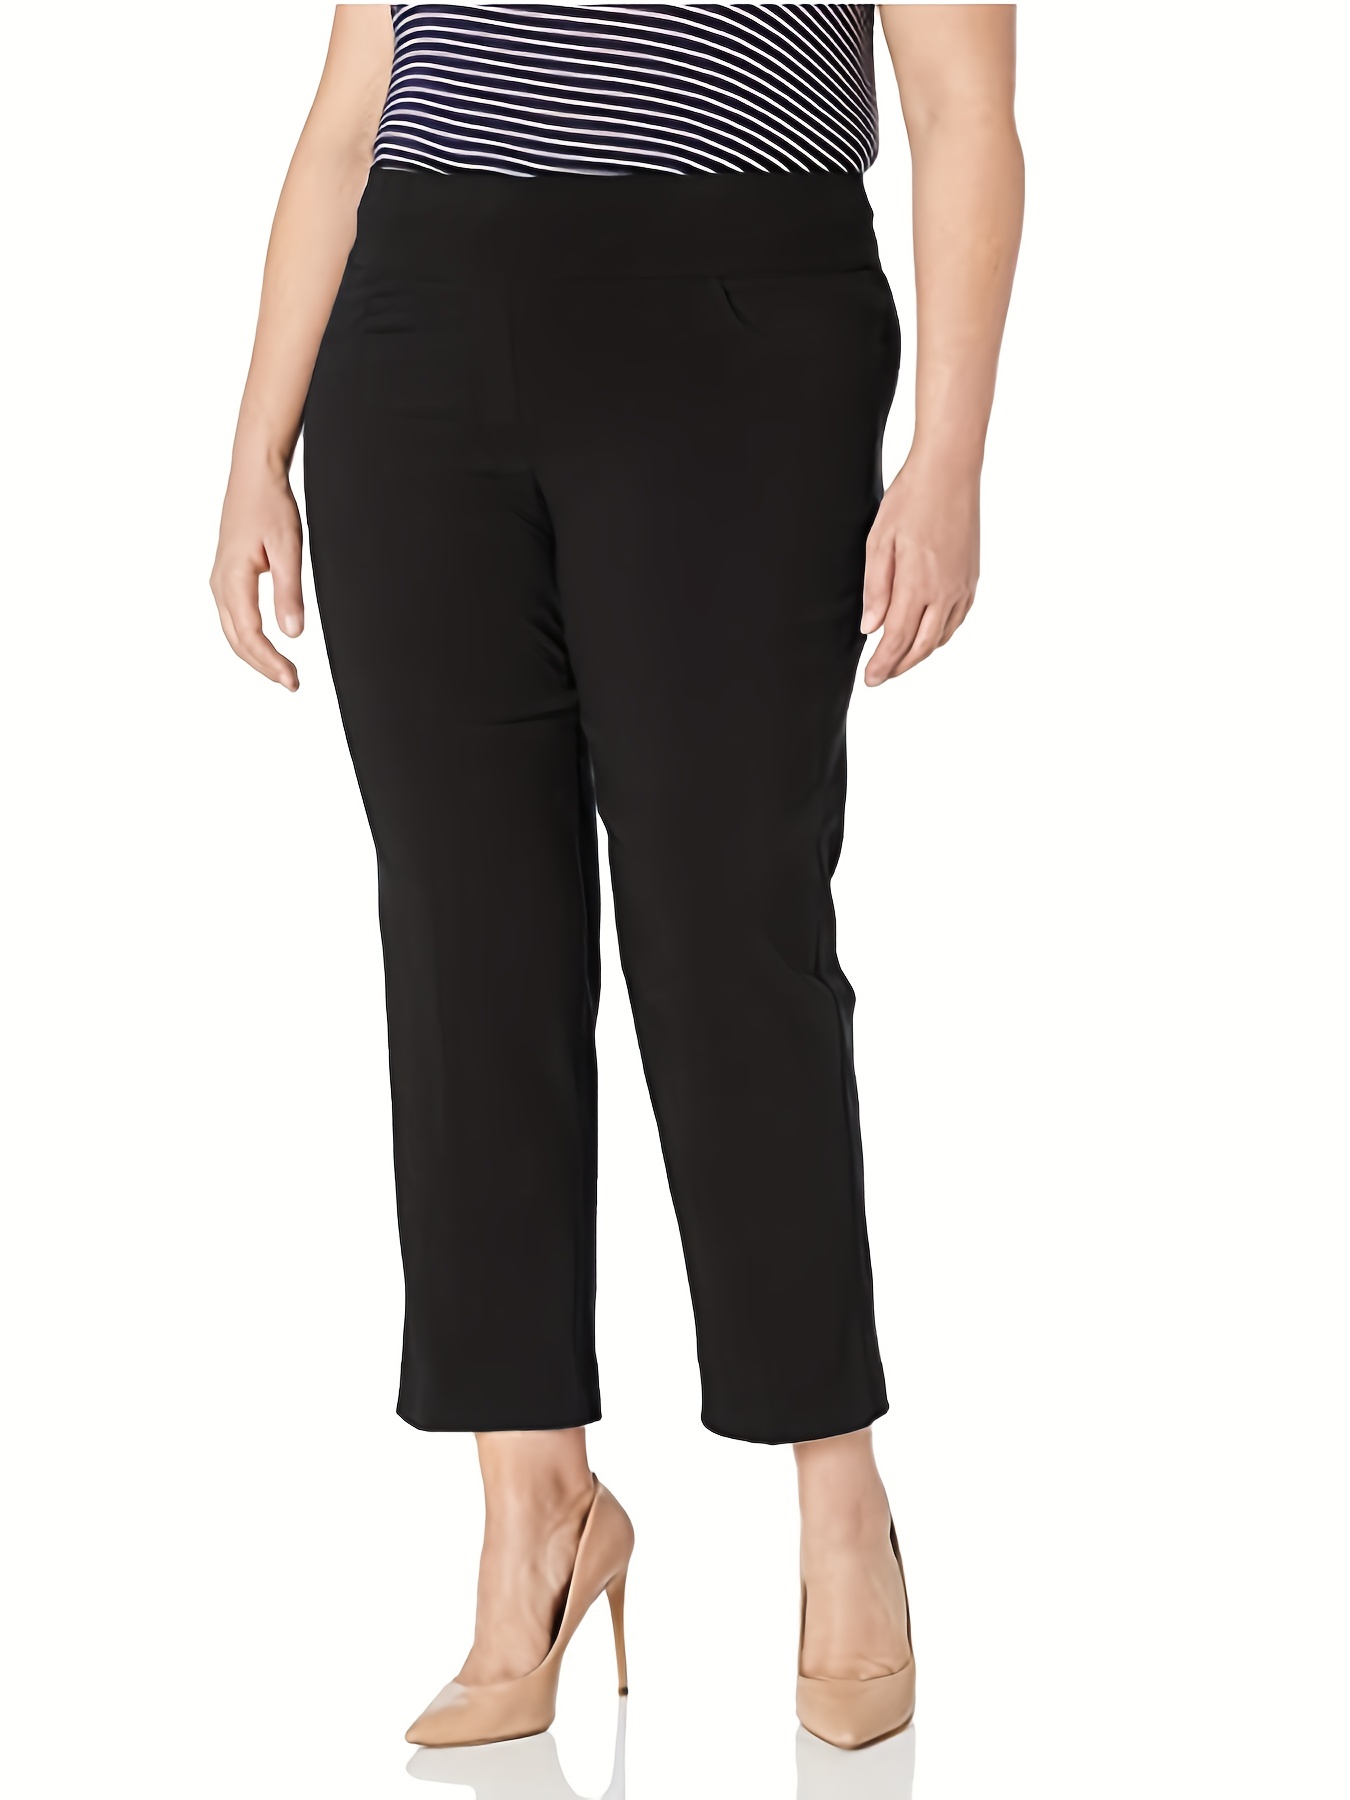 Plus Size Basic Pants, Women's Plus Solid High * Medium Stretch Workwear  Trousers With Pockets